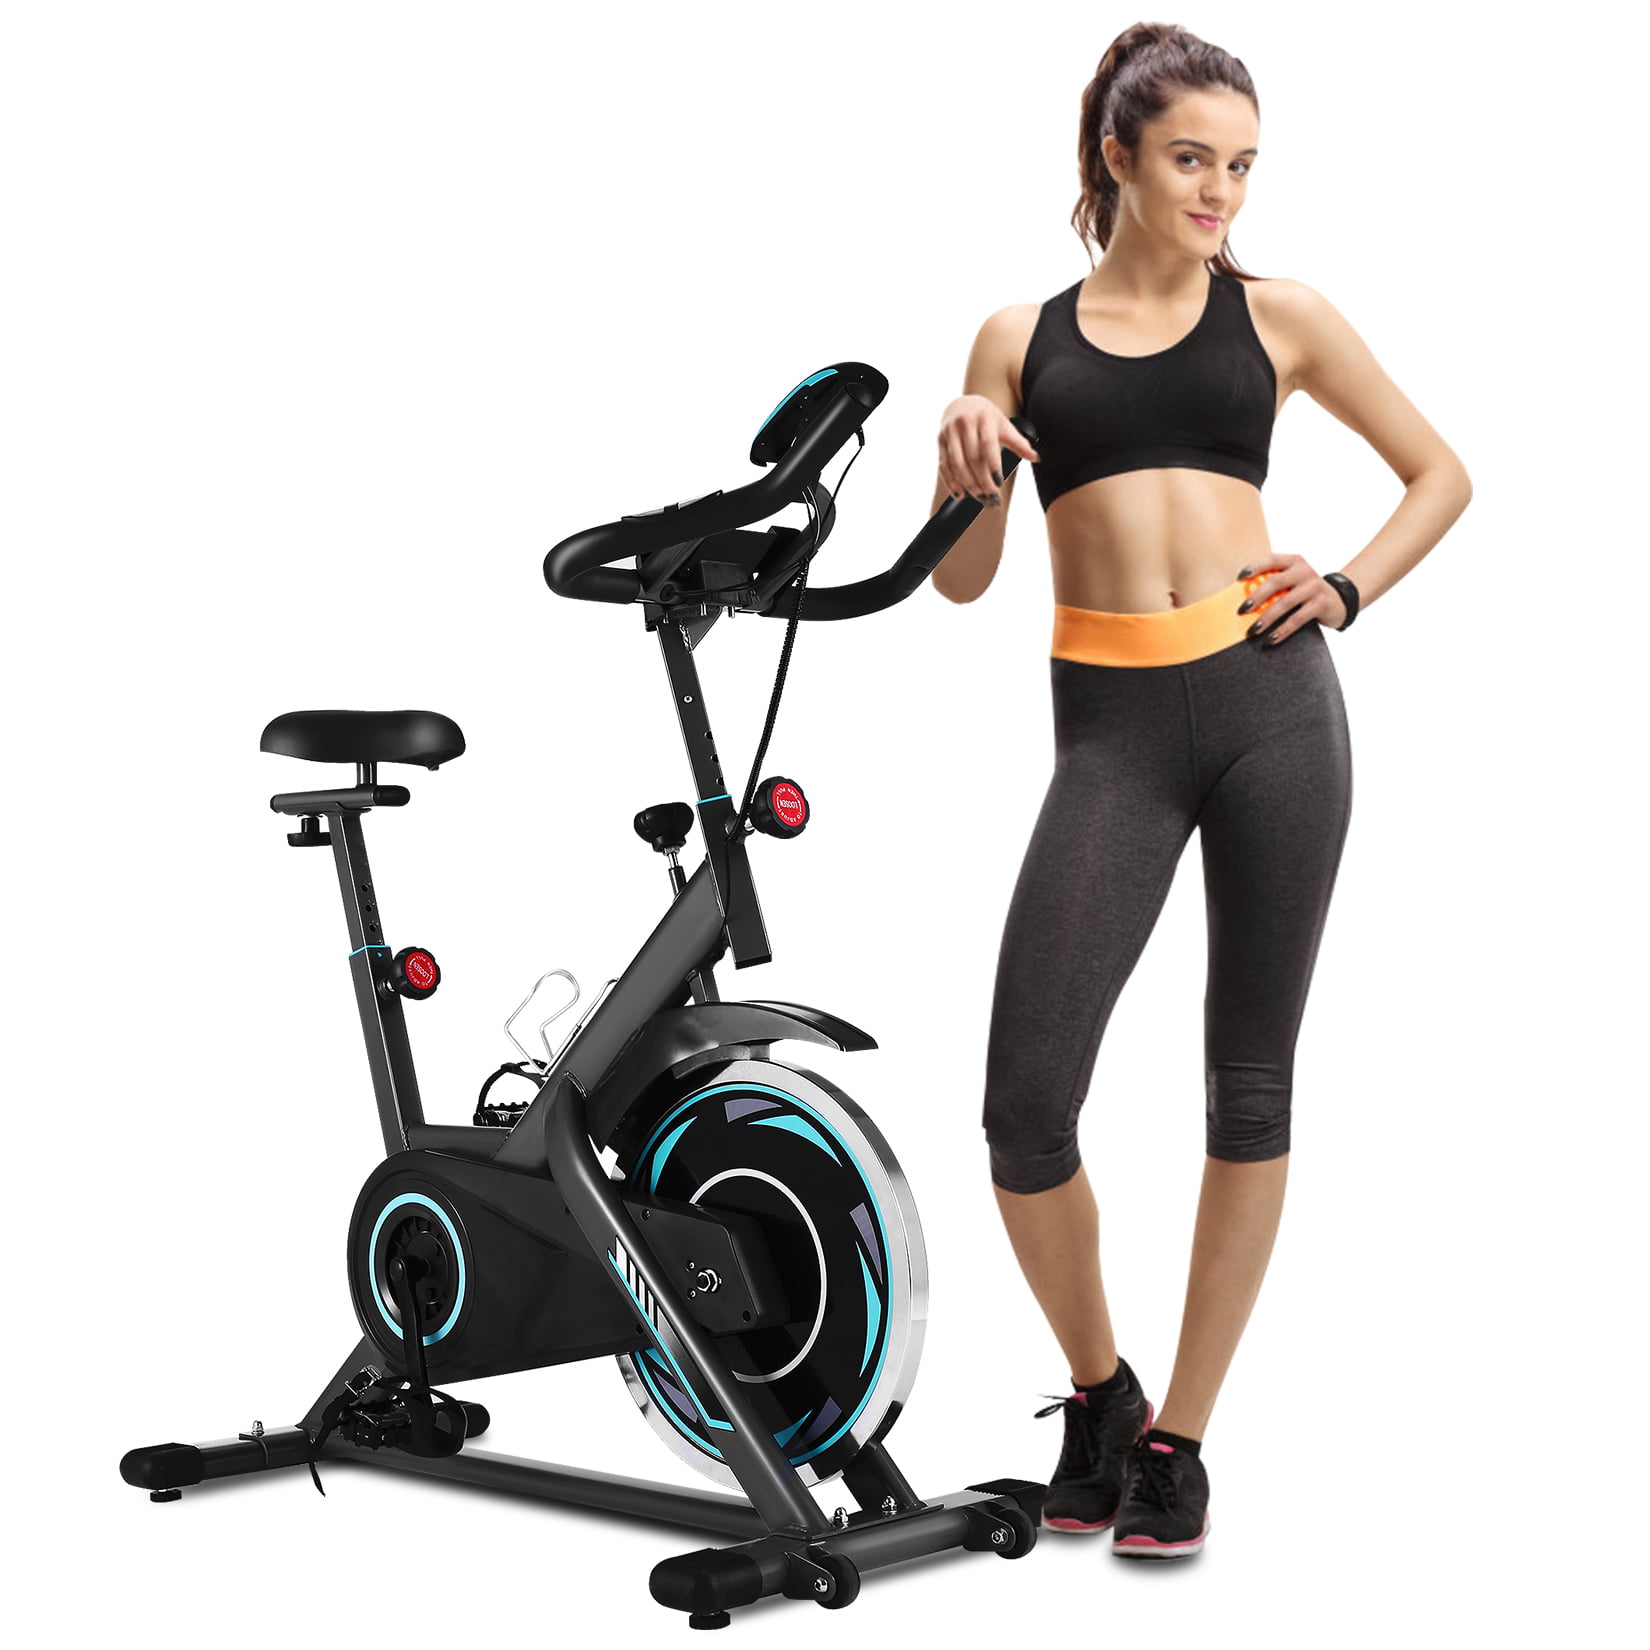 ANCHEER Folding Exercise Bike with Big Heart LCD Rate Monitor & Seat Cushion 